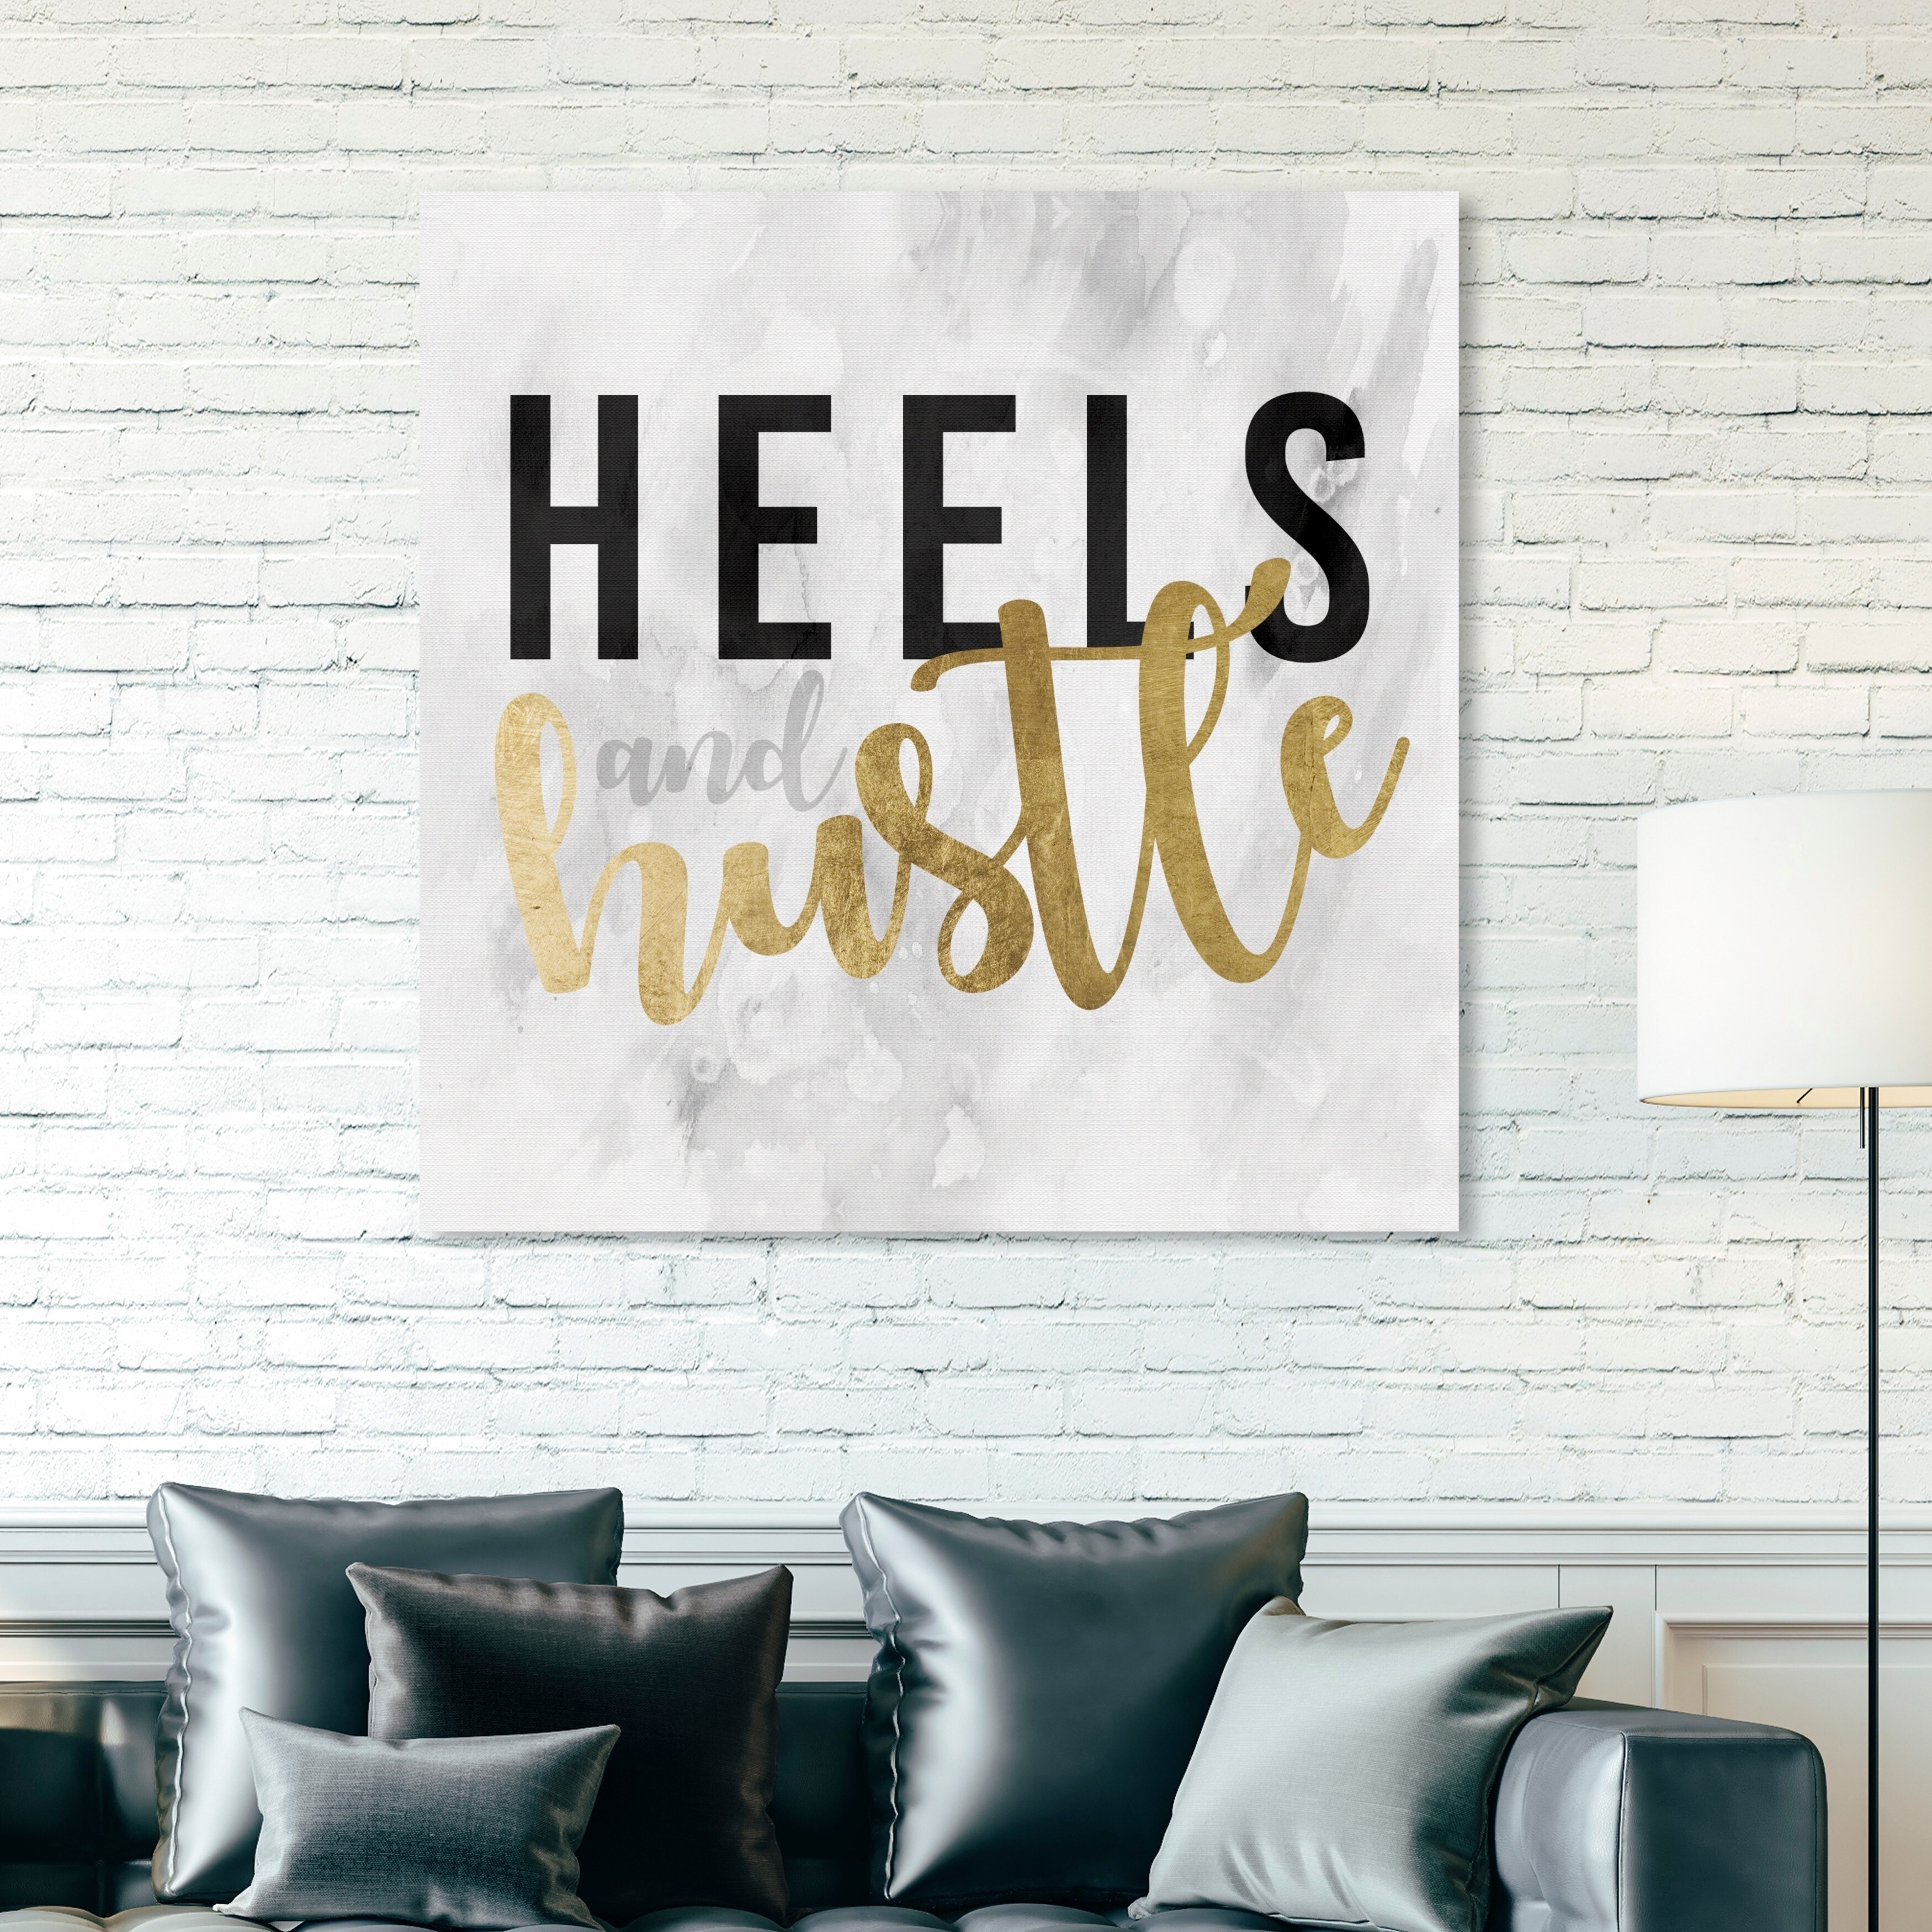 Shop Oliver Gal Typography And Quotes Wall Art Canvas Prints Heels And Hustle Gold Fashion Quotes And Sayings Gold Black Overstock 30765057